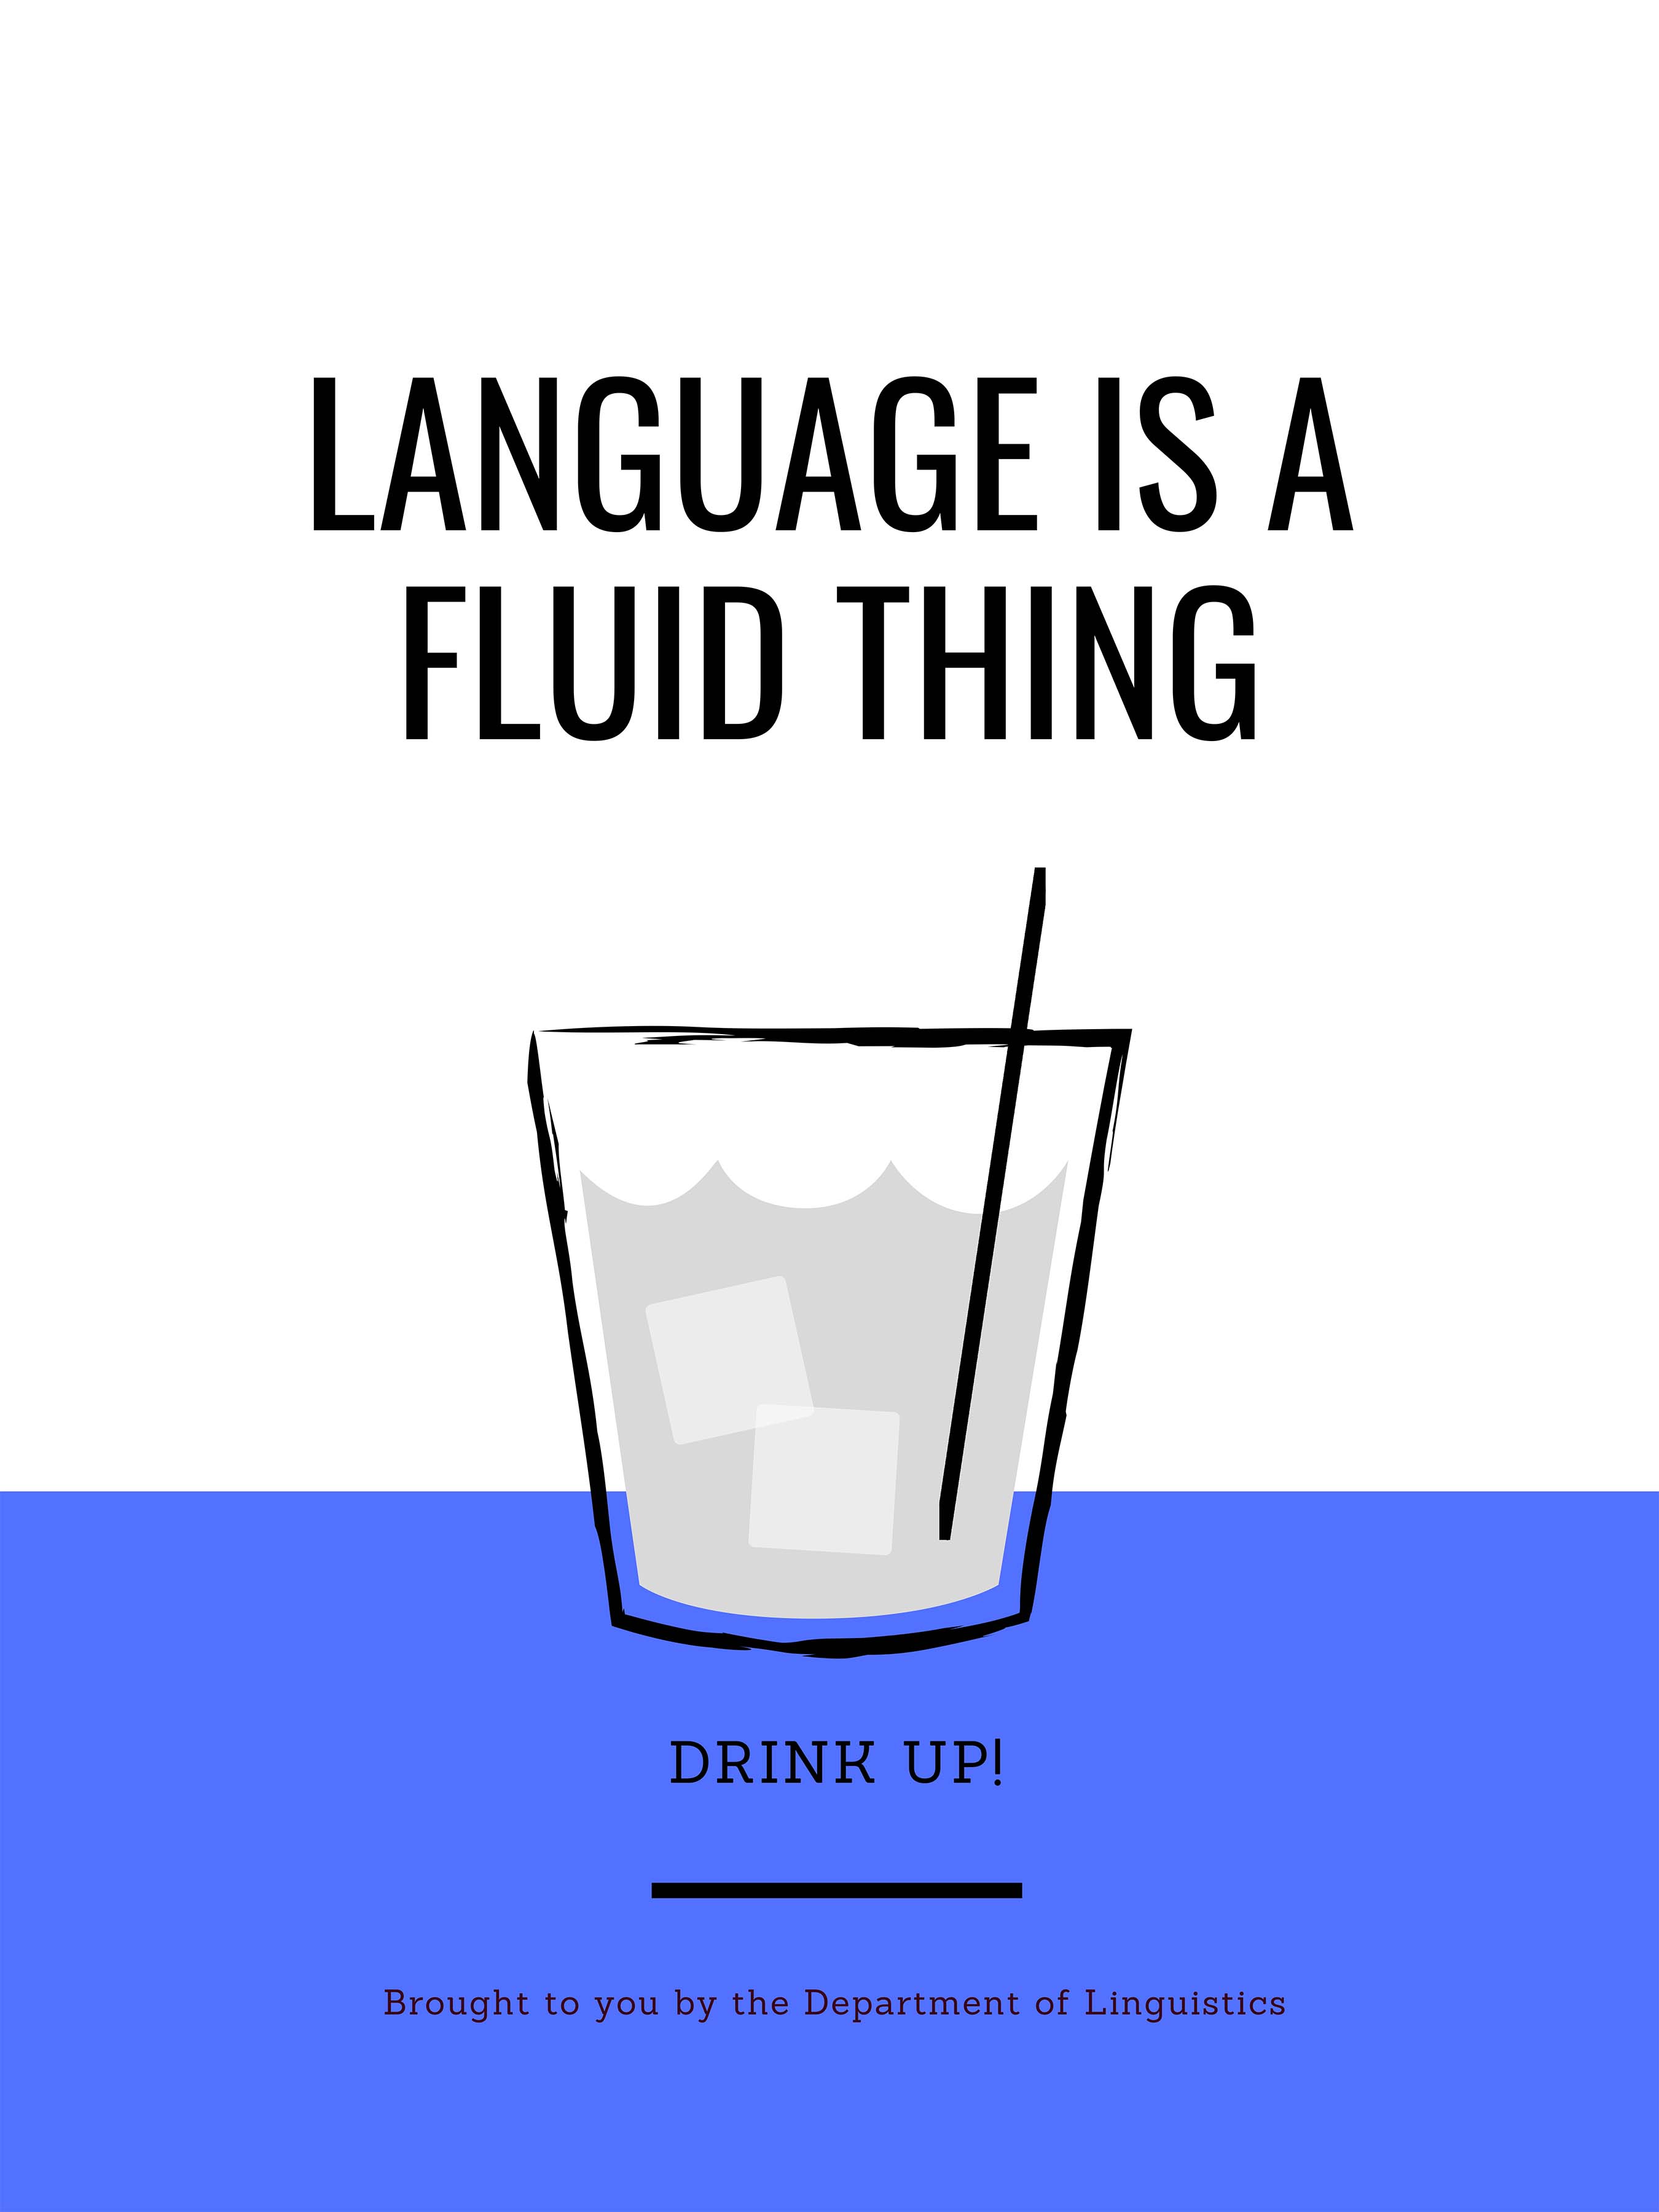 Language is a fluid thing. Drink up! Brought to you by the Department of Linguistics. Shows a drinking glass with ice and a straw.